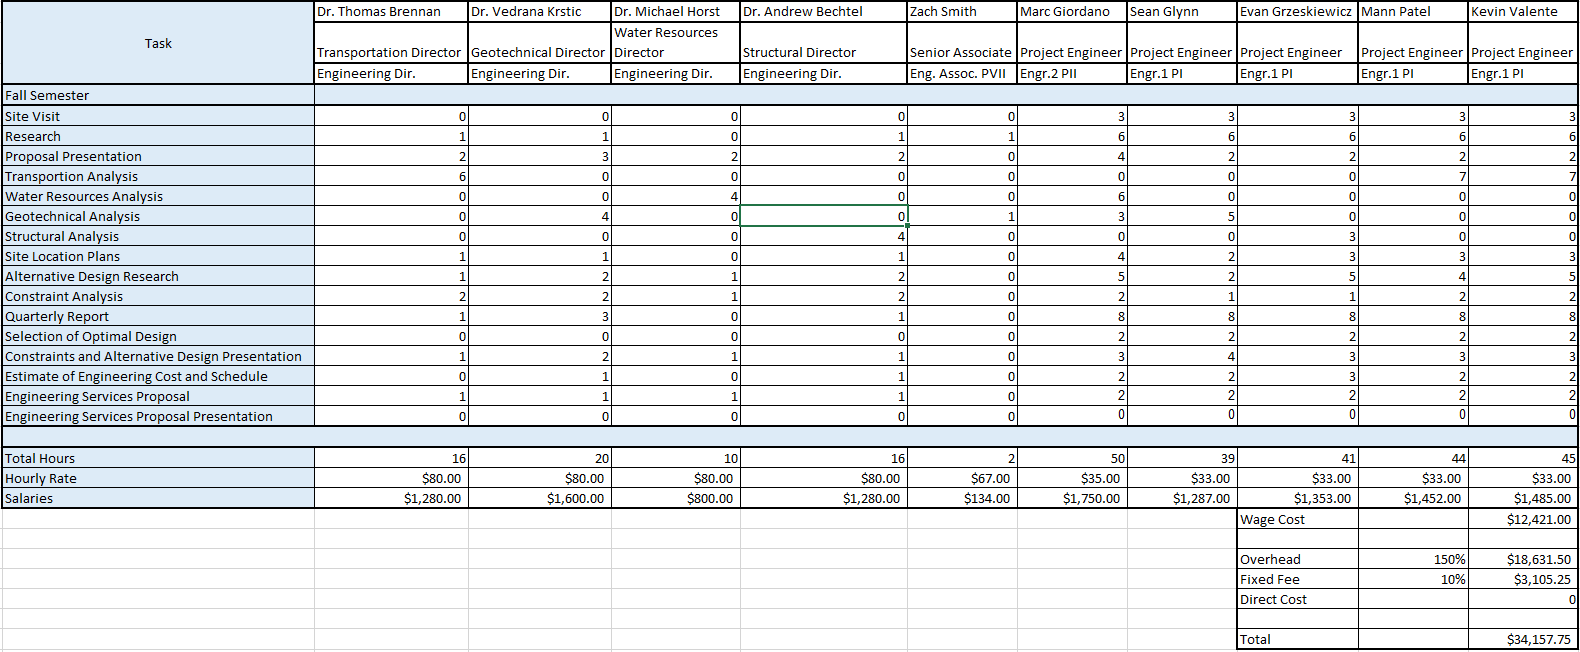 Image of expense breakdown for design team personnel and professional advisors. 